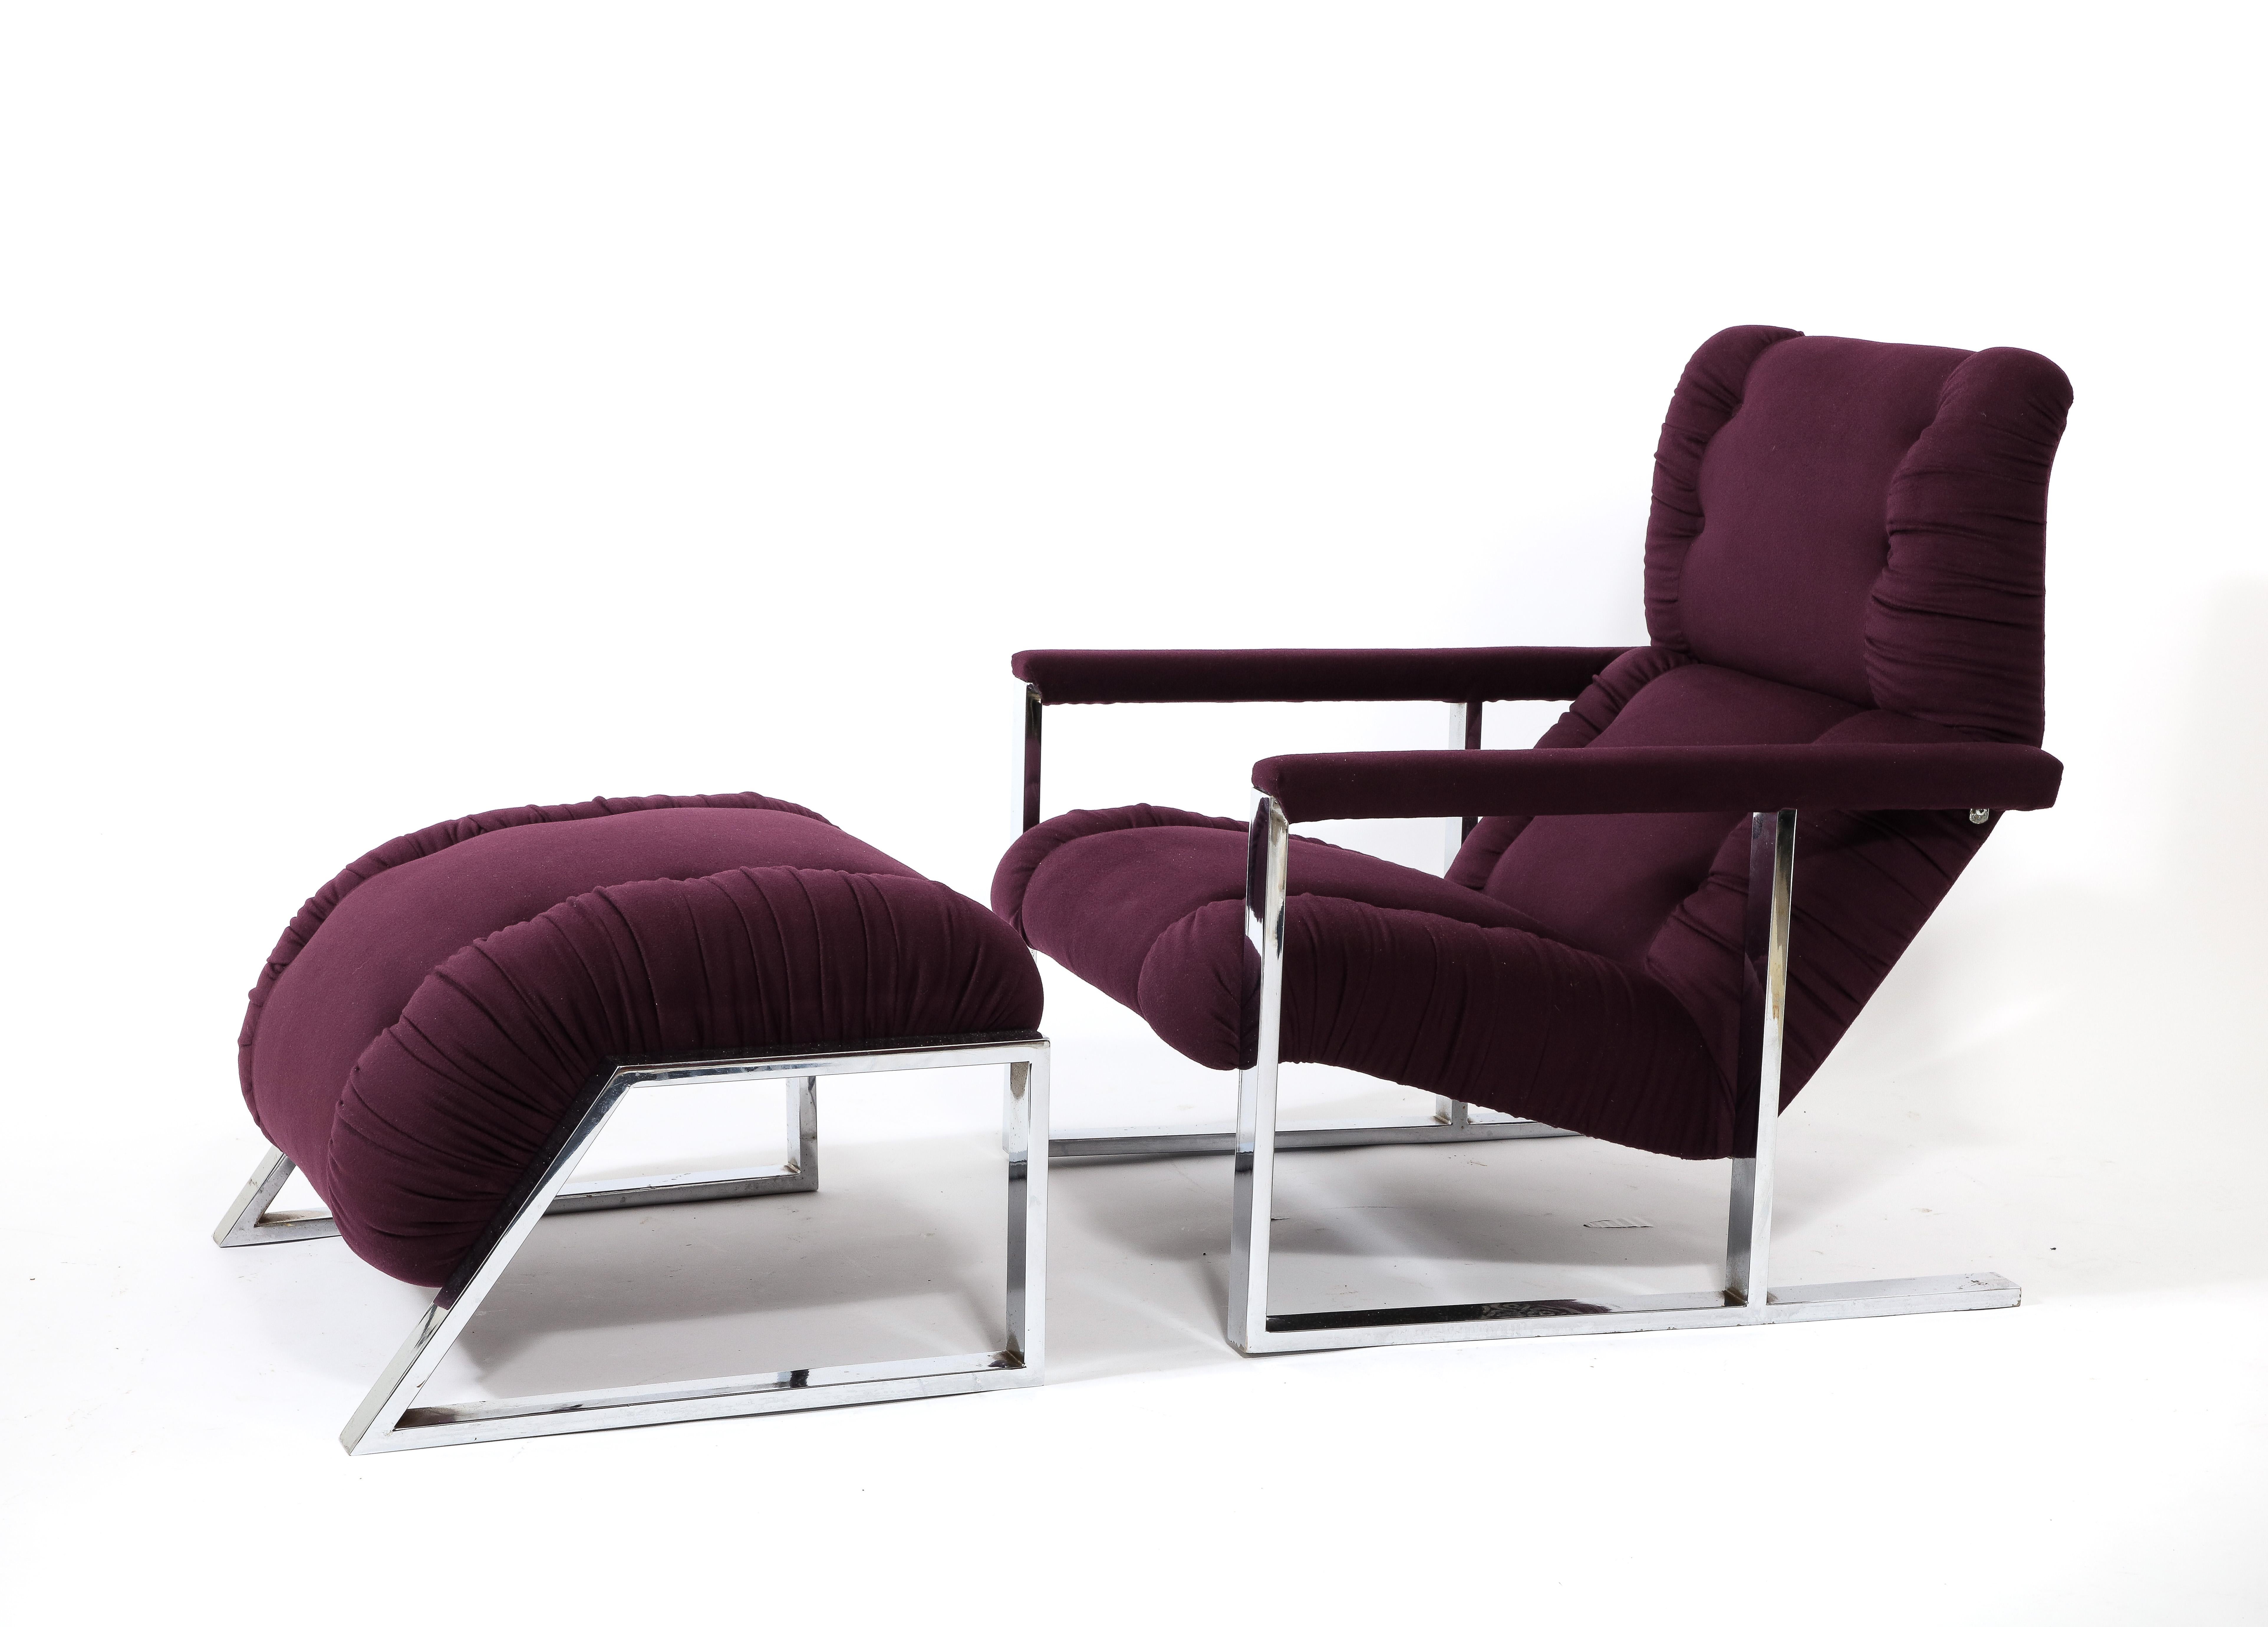 Modernist Angular Chrome Lounge Chair & Ottoman in Aubergine Wool, USA 1970's In Good Condition For Sale In New York, NY